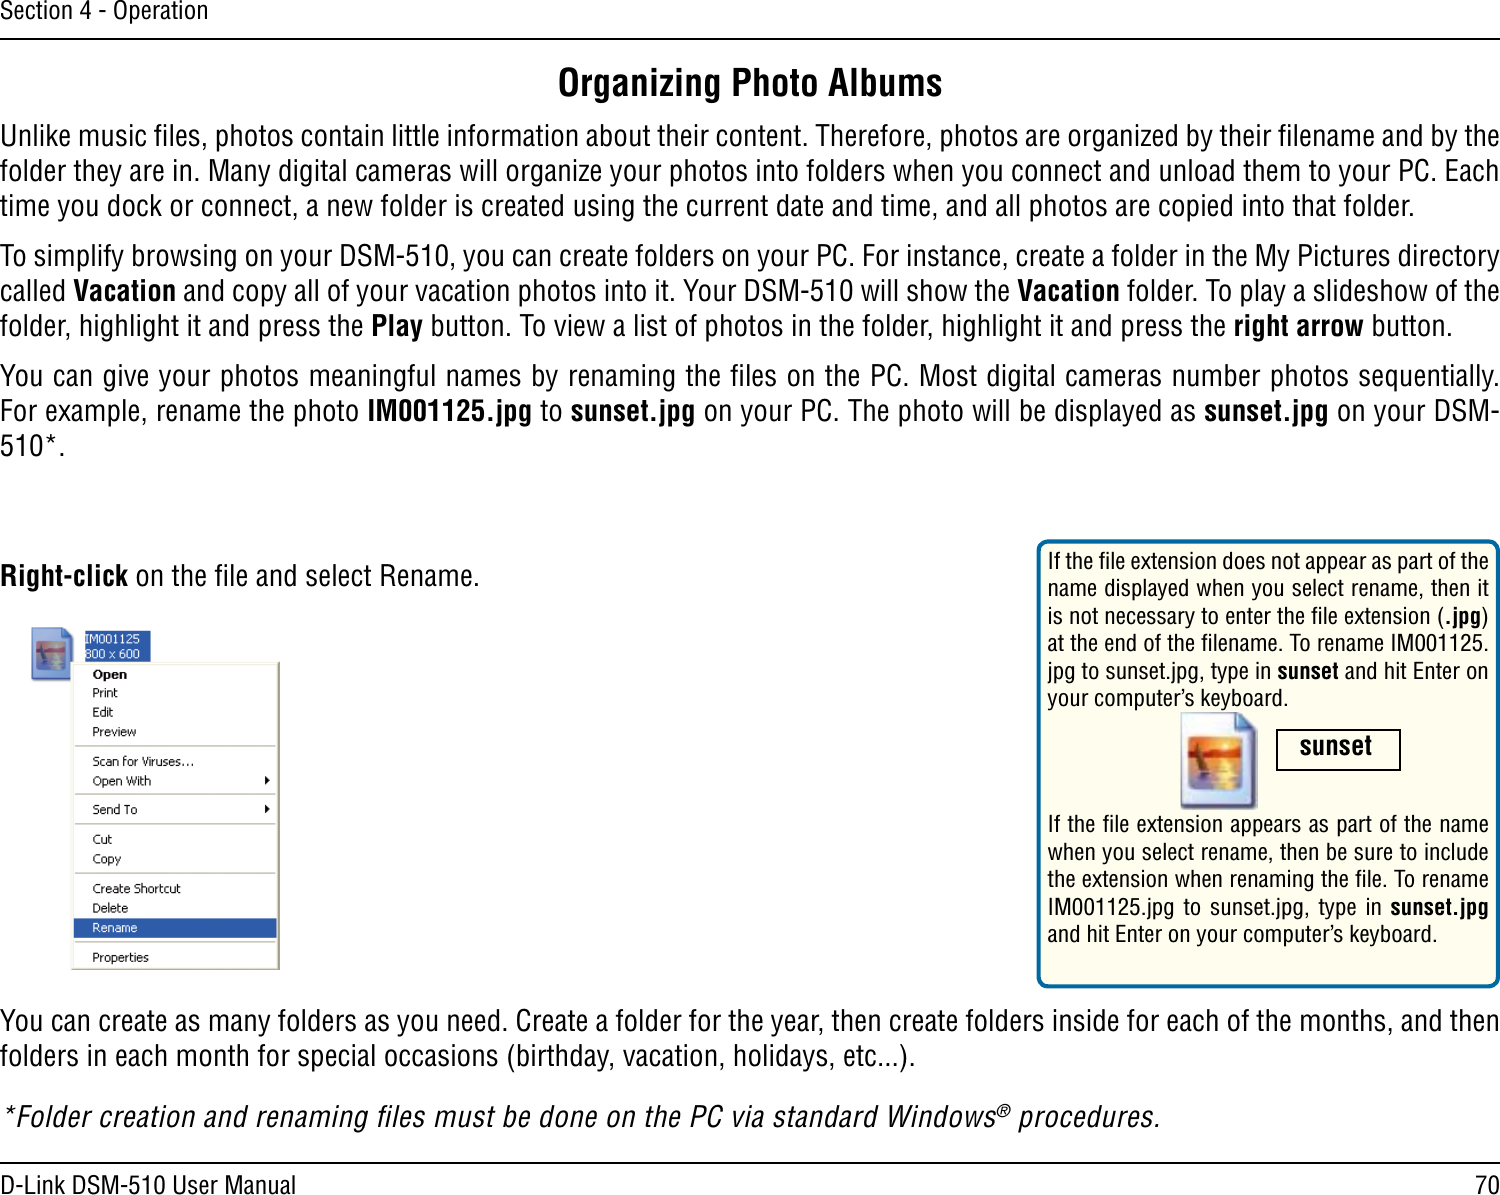 70D-Link DSM-510 User ManualSection 4 - OperationOrganizing Photo AlbumsUnlike music ﬁles, photos contain little information about their content. Therefore, photos are organized by their ﬁlename and by the folder they are in. Many digital cameras will organize your photos into folders when you connect and unload them to your PC. Each time you dock or connect, a new folder is created using the current date and time, and all photos are copied into that folder.  To simplify browsing on your DSM-510, you can create folders on your PC. For instance, create a folder in the My Pictures directory called Vacation and copy all of your vacation photos into it. Your DSM-510 will show the Vacation folder. To play a slideshow of the folder, highlight it and press the Play button. To view a list of photos in the folder, highlight it and press the right arrow button.You can give your photos meaningful names by renaming the ﬁles on the PC. Most digital cameras number photos sequentially. For example, rename the photo IM001125.jpg to sunset.jpg on your PC. The photo will be displayed as sunset.jpg on your DSM-510*.You can create as many folders as you need. Create a folder for the year, then create folders inside for each of the months, and then folders in each month for special occasions (birthday, vacation, holidays, etc...).*Folder creation and renaming ﬁles must be done on the PC via standard Windows® procedures.If the ﬁle extension does not appear as part of the name displayed when you select rename, then it is not necessary to enter the ﬁle extension (.jpg) at the end of the ﬁlename. To rename IM001125.jpg to sunset.jpg, type in sunset and hit Enter on your computer’s keyboard. Right-click on the ﬁle and select Rename. If the ﬁle extension appears as part of the name when you select rename, then be sure to include the extension when renaming the ﬁle. To rename IM001125.jpg  to sunset.jpg, type in sunset.jpg and hit Enter on your computer’s keyboard. sunset